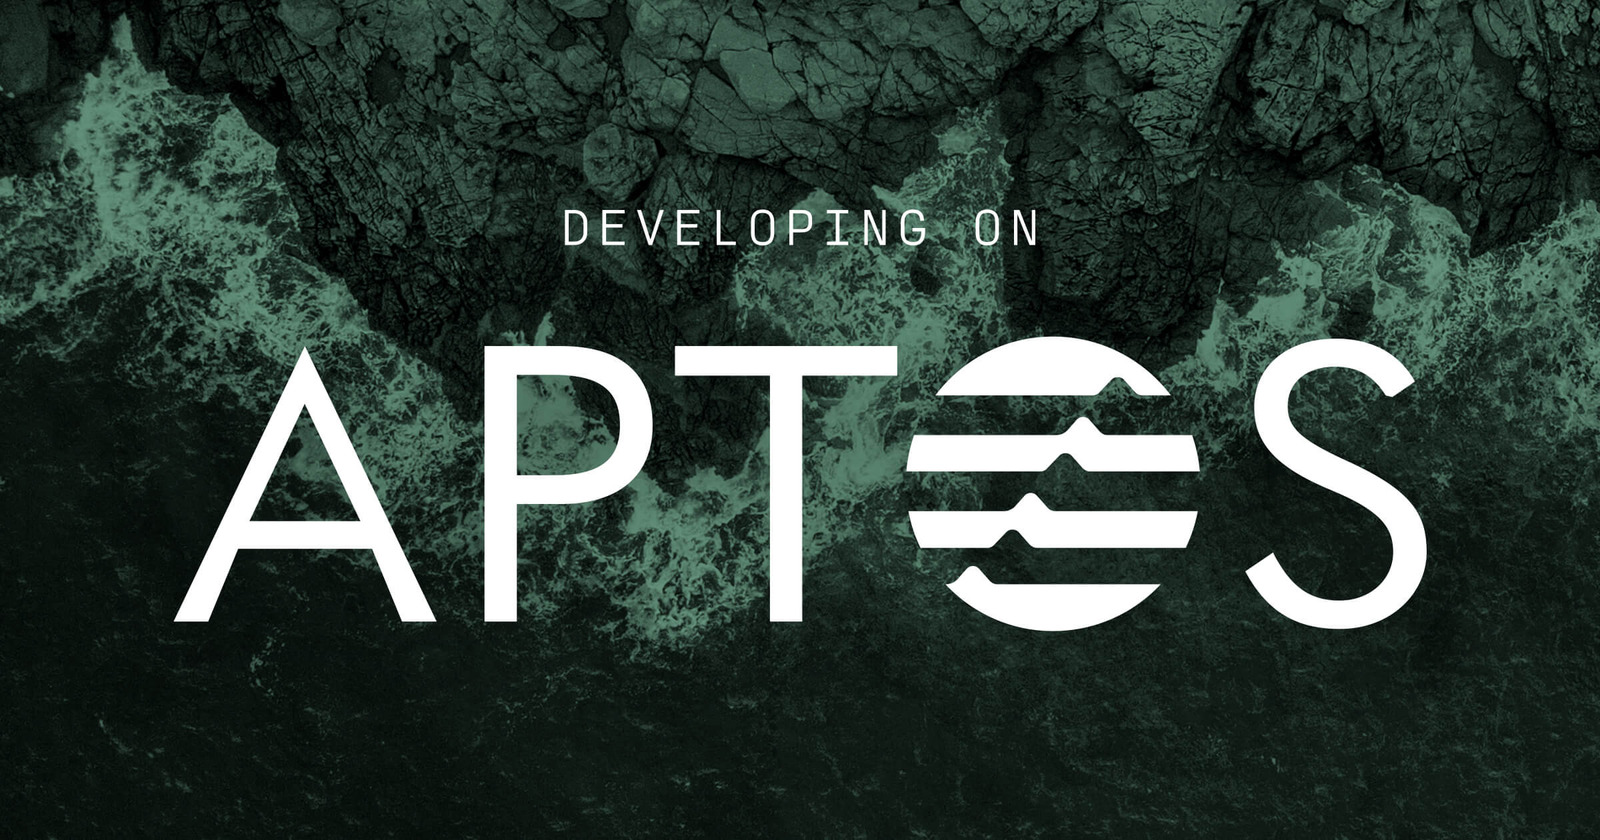 Aptos Labs launches its blockchain - Binance and Coinbase hurry to list APT